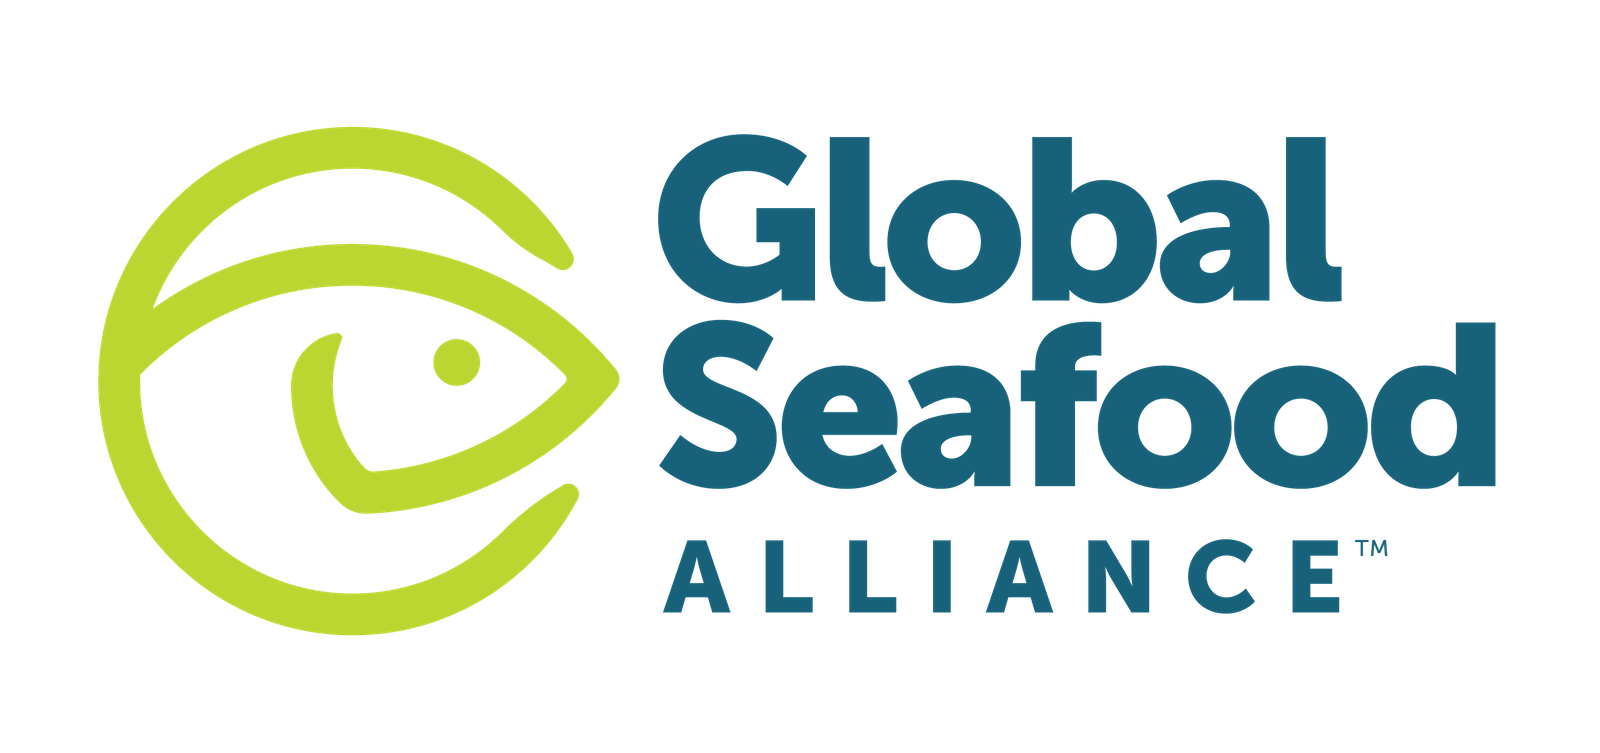 Article image for GAA’s Lee To Address 9th North Atlantic Seafood Forum